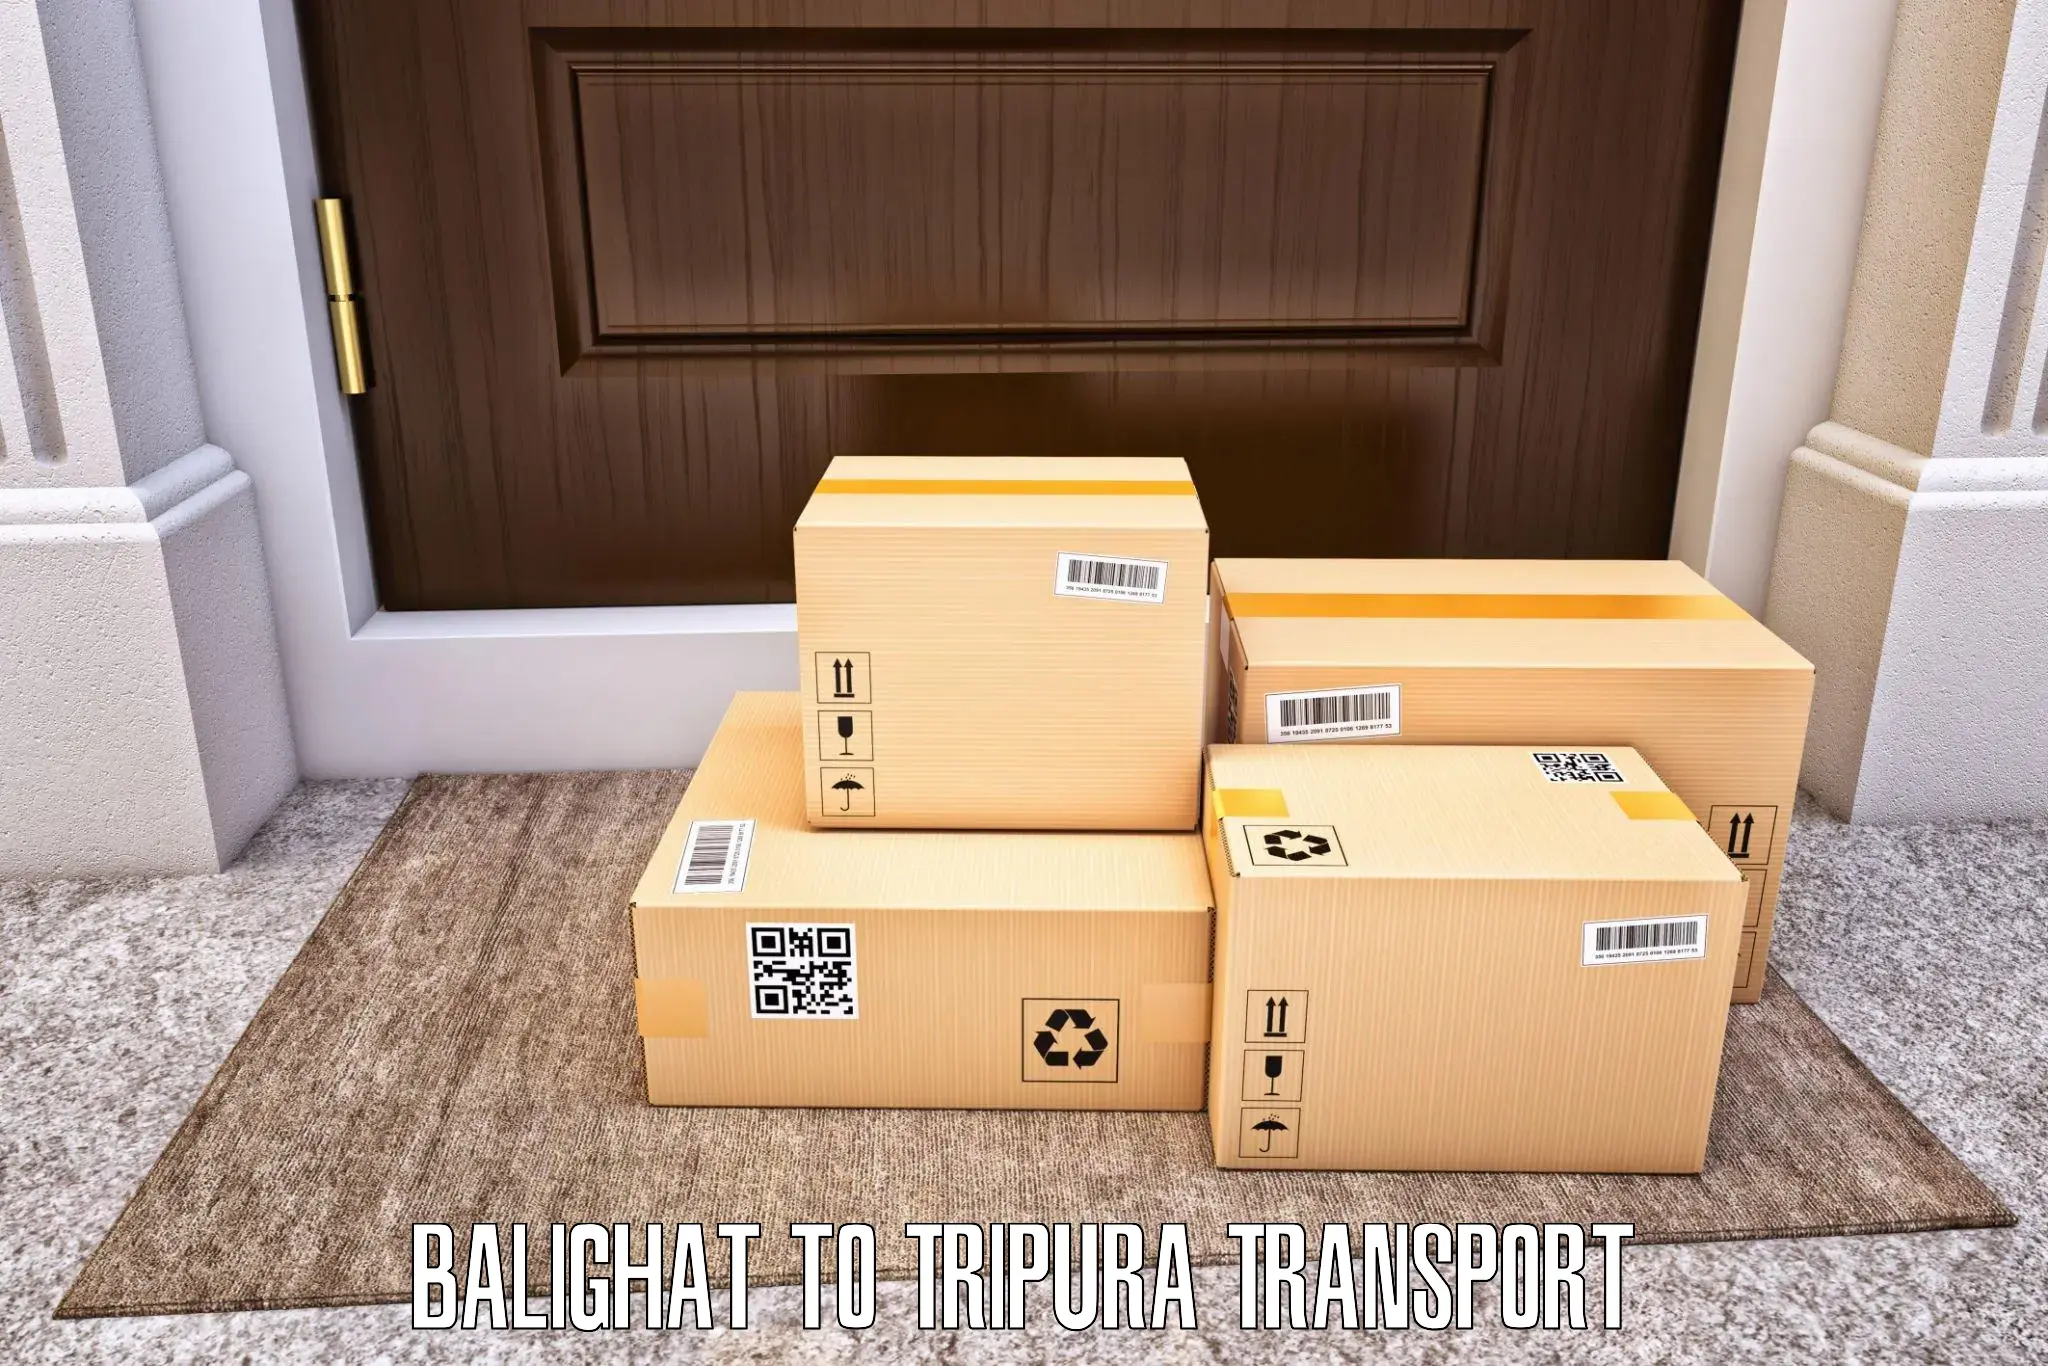 Container transport service Balighat to Tripura